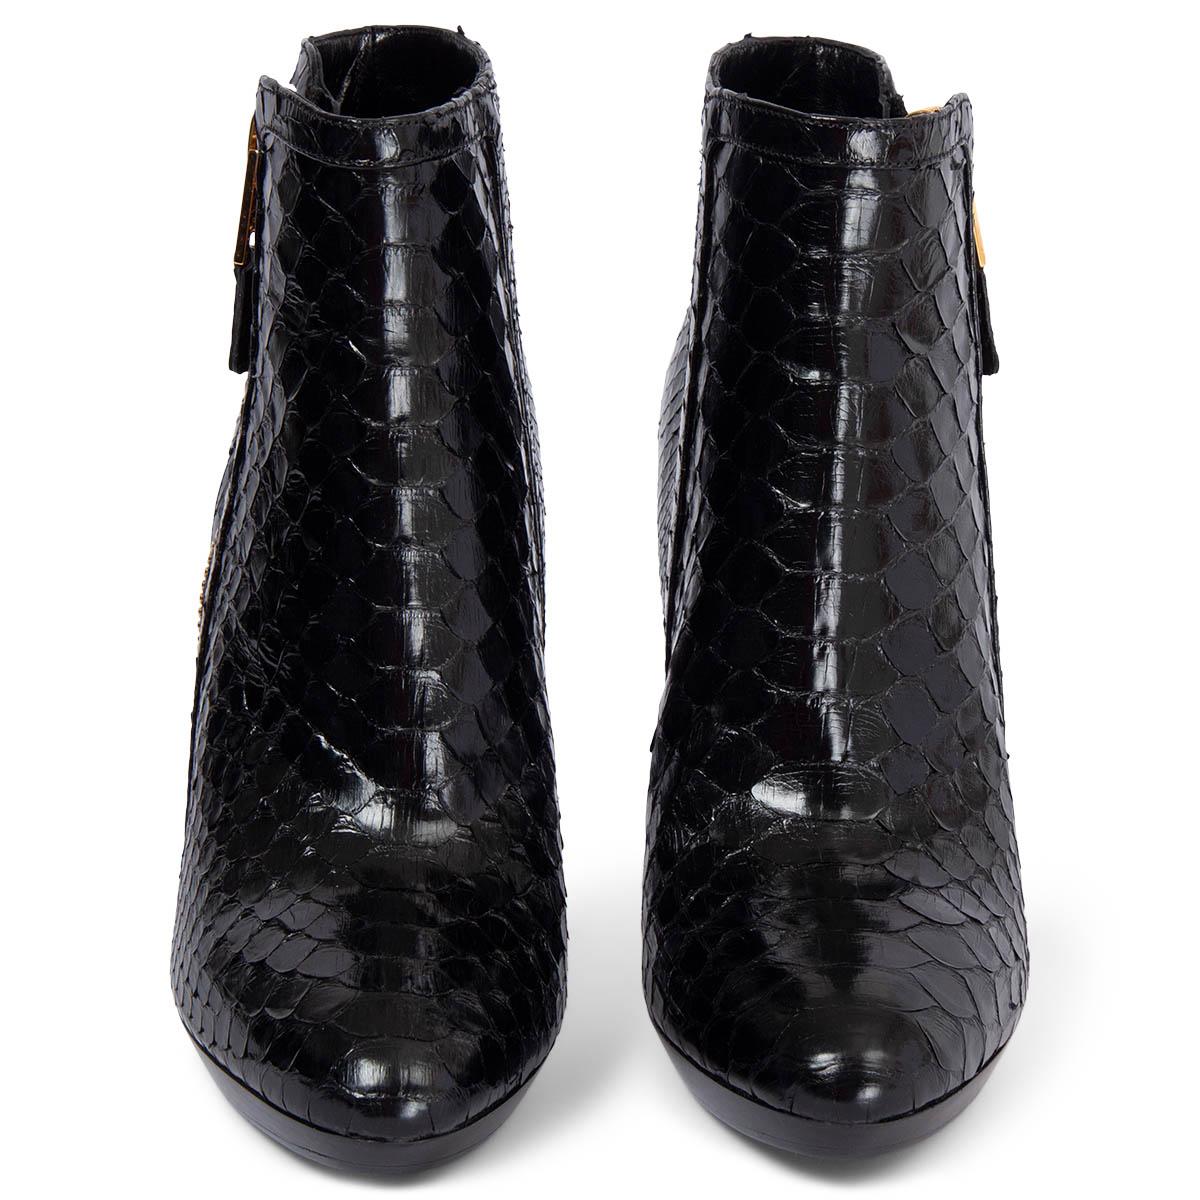 100% authentic Tom Ford ankle-boots in black glossy python leather featuring chunky gold-tone metal zipper. Have been worn once and are in virtually new condition. 

Measurements
Model	W05877
Imprinted Size	40
Inside Sole	27cm (10.5in)
Width	7.5cm